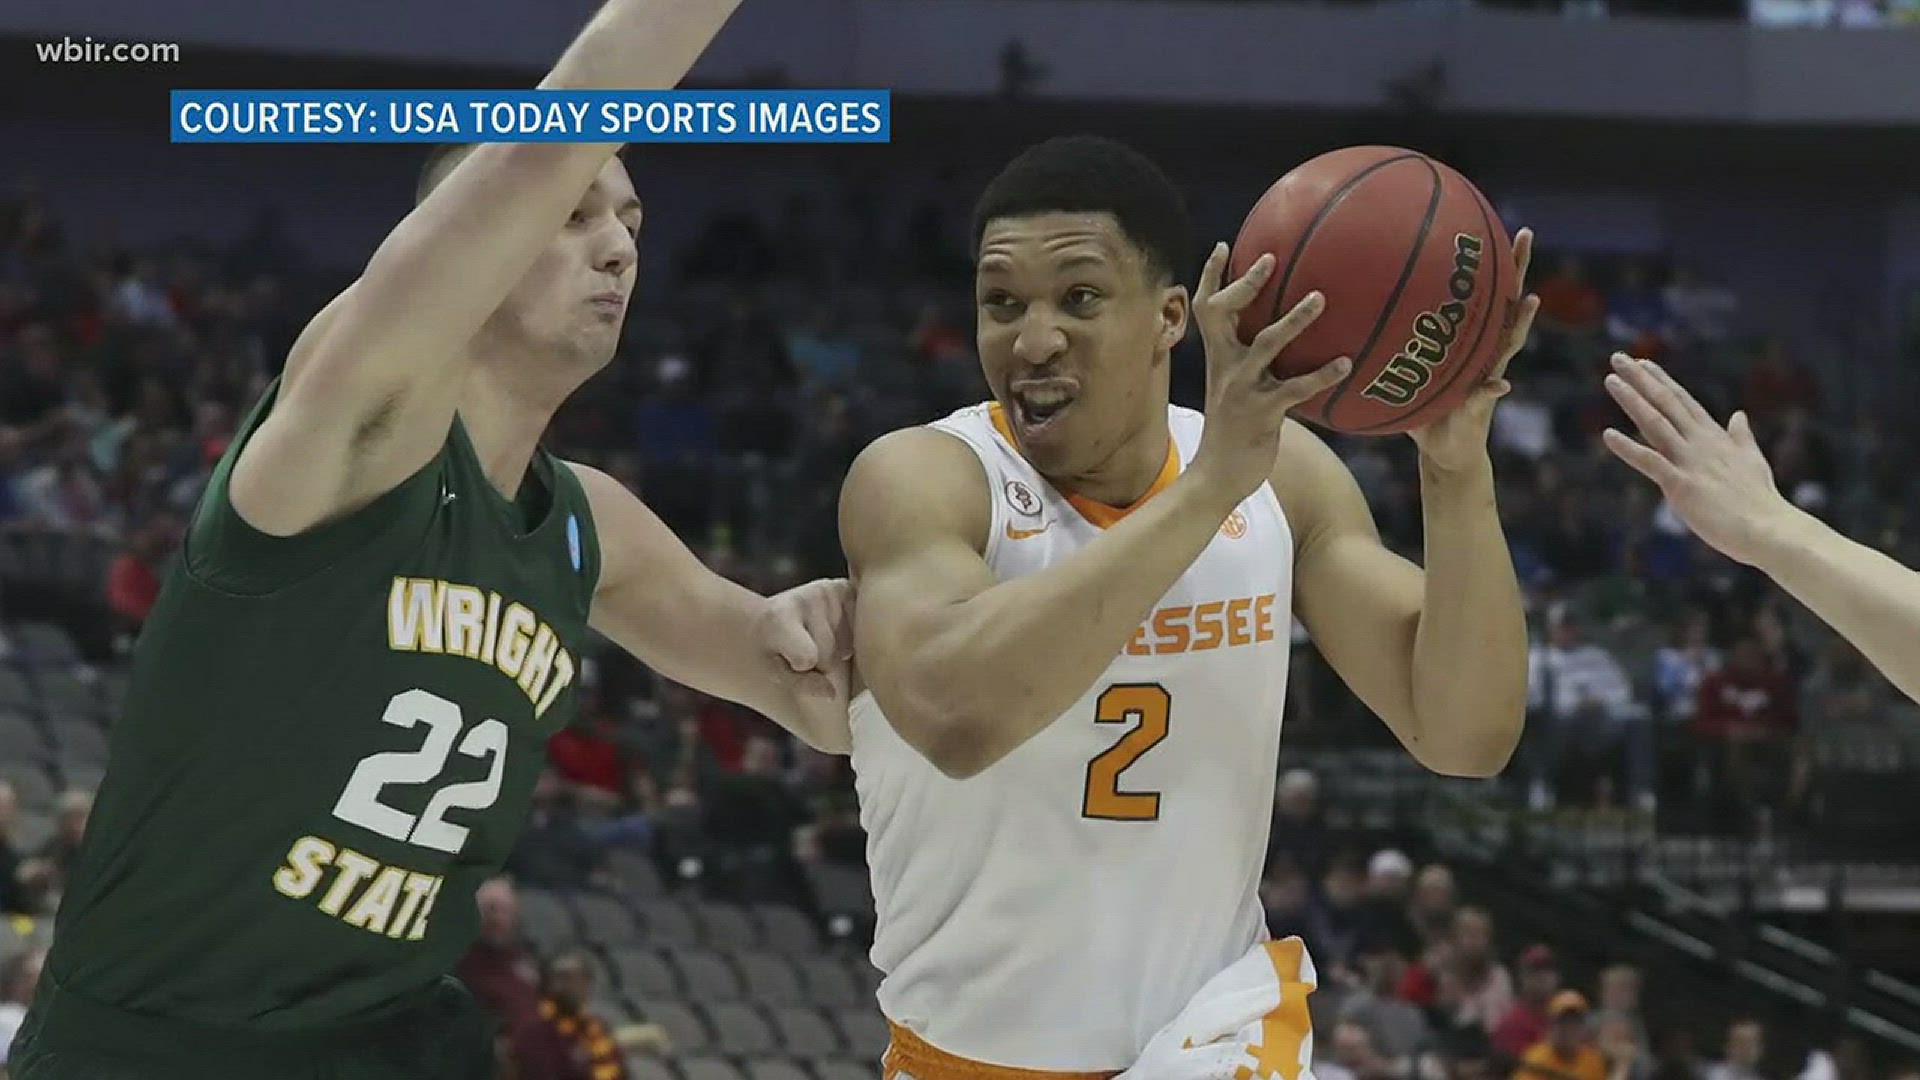 Tennessee's defense locked down Horizon League champ Wright State to help the Vols to a 73-47 win in the first round of the NCAA Tournament. The 47 points scored by the Raiders are the fewest Tennessee has ever allowed in an NCAA Tournament game.